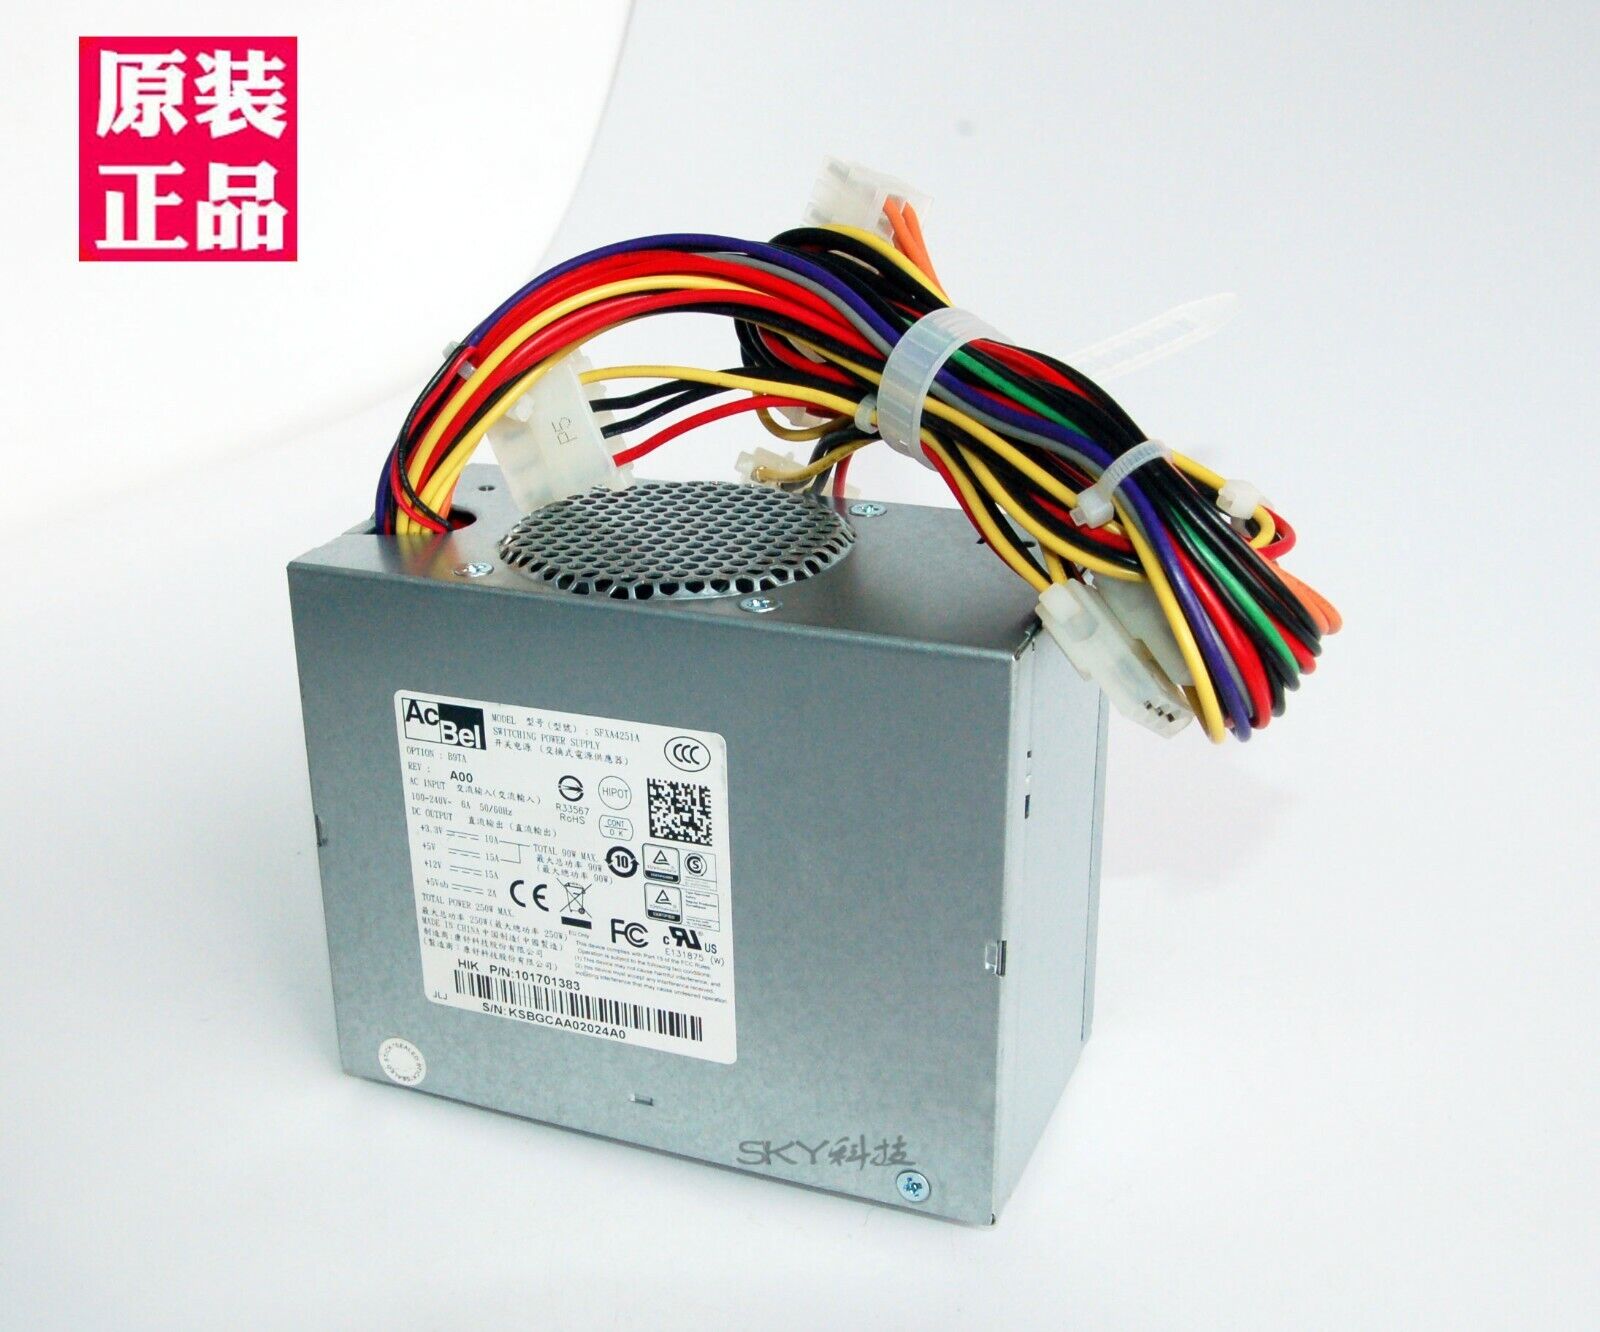 Qty:1pc for monitoring power supply acbel SFXA4251A